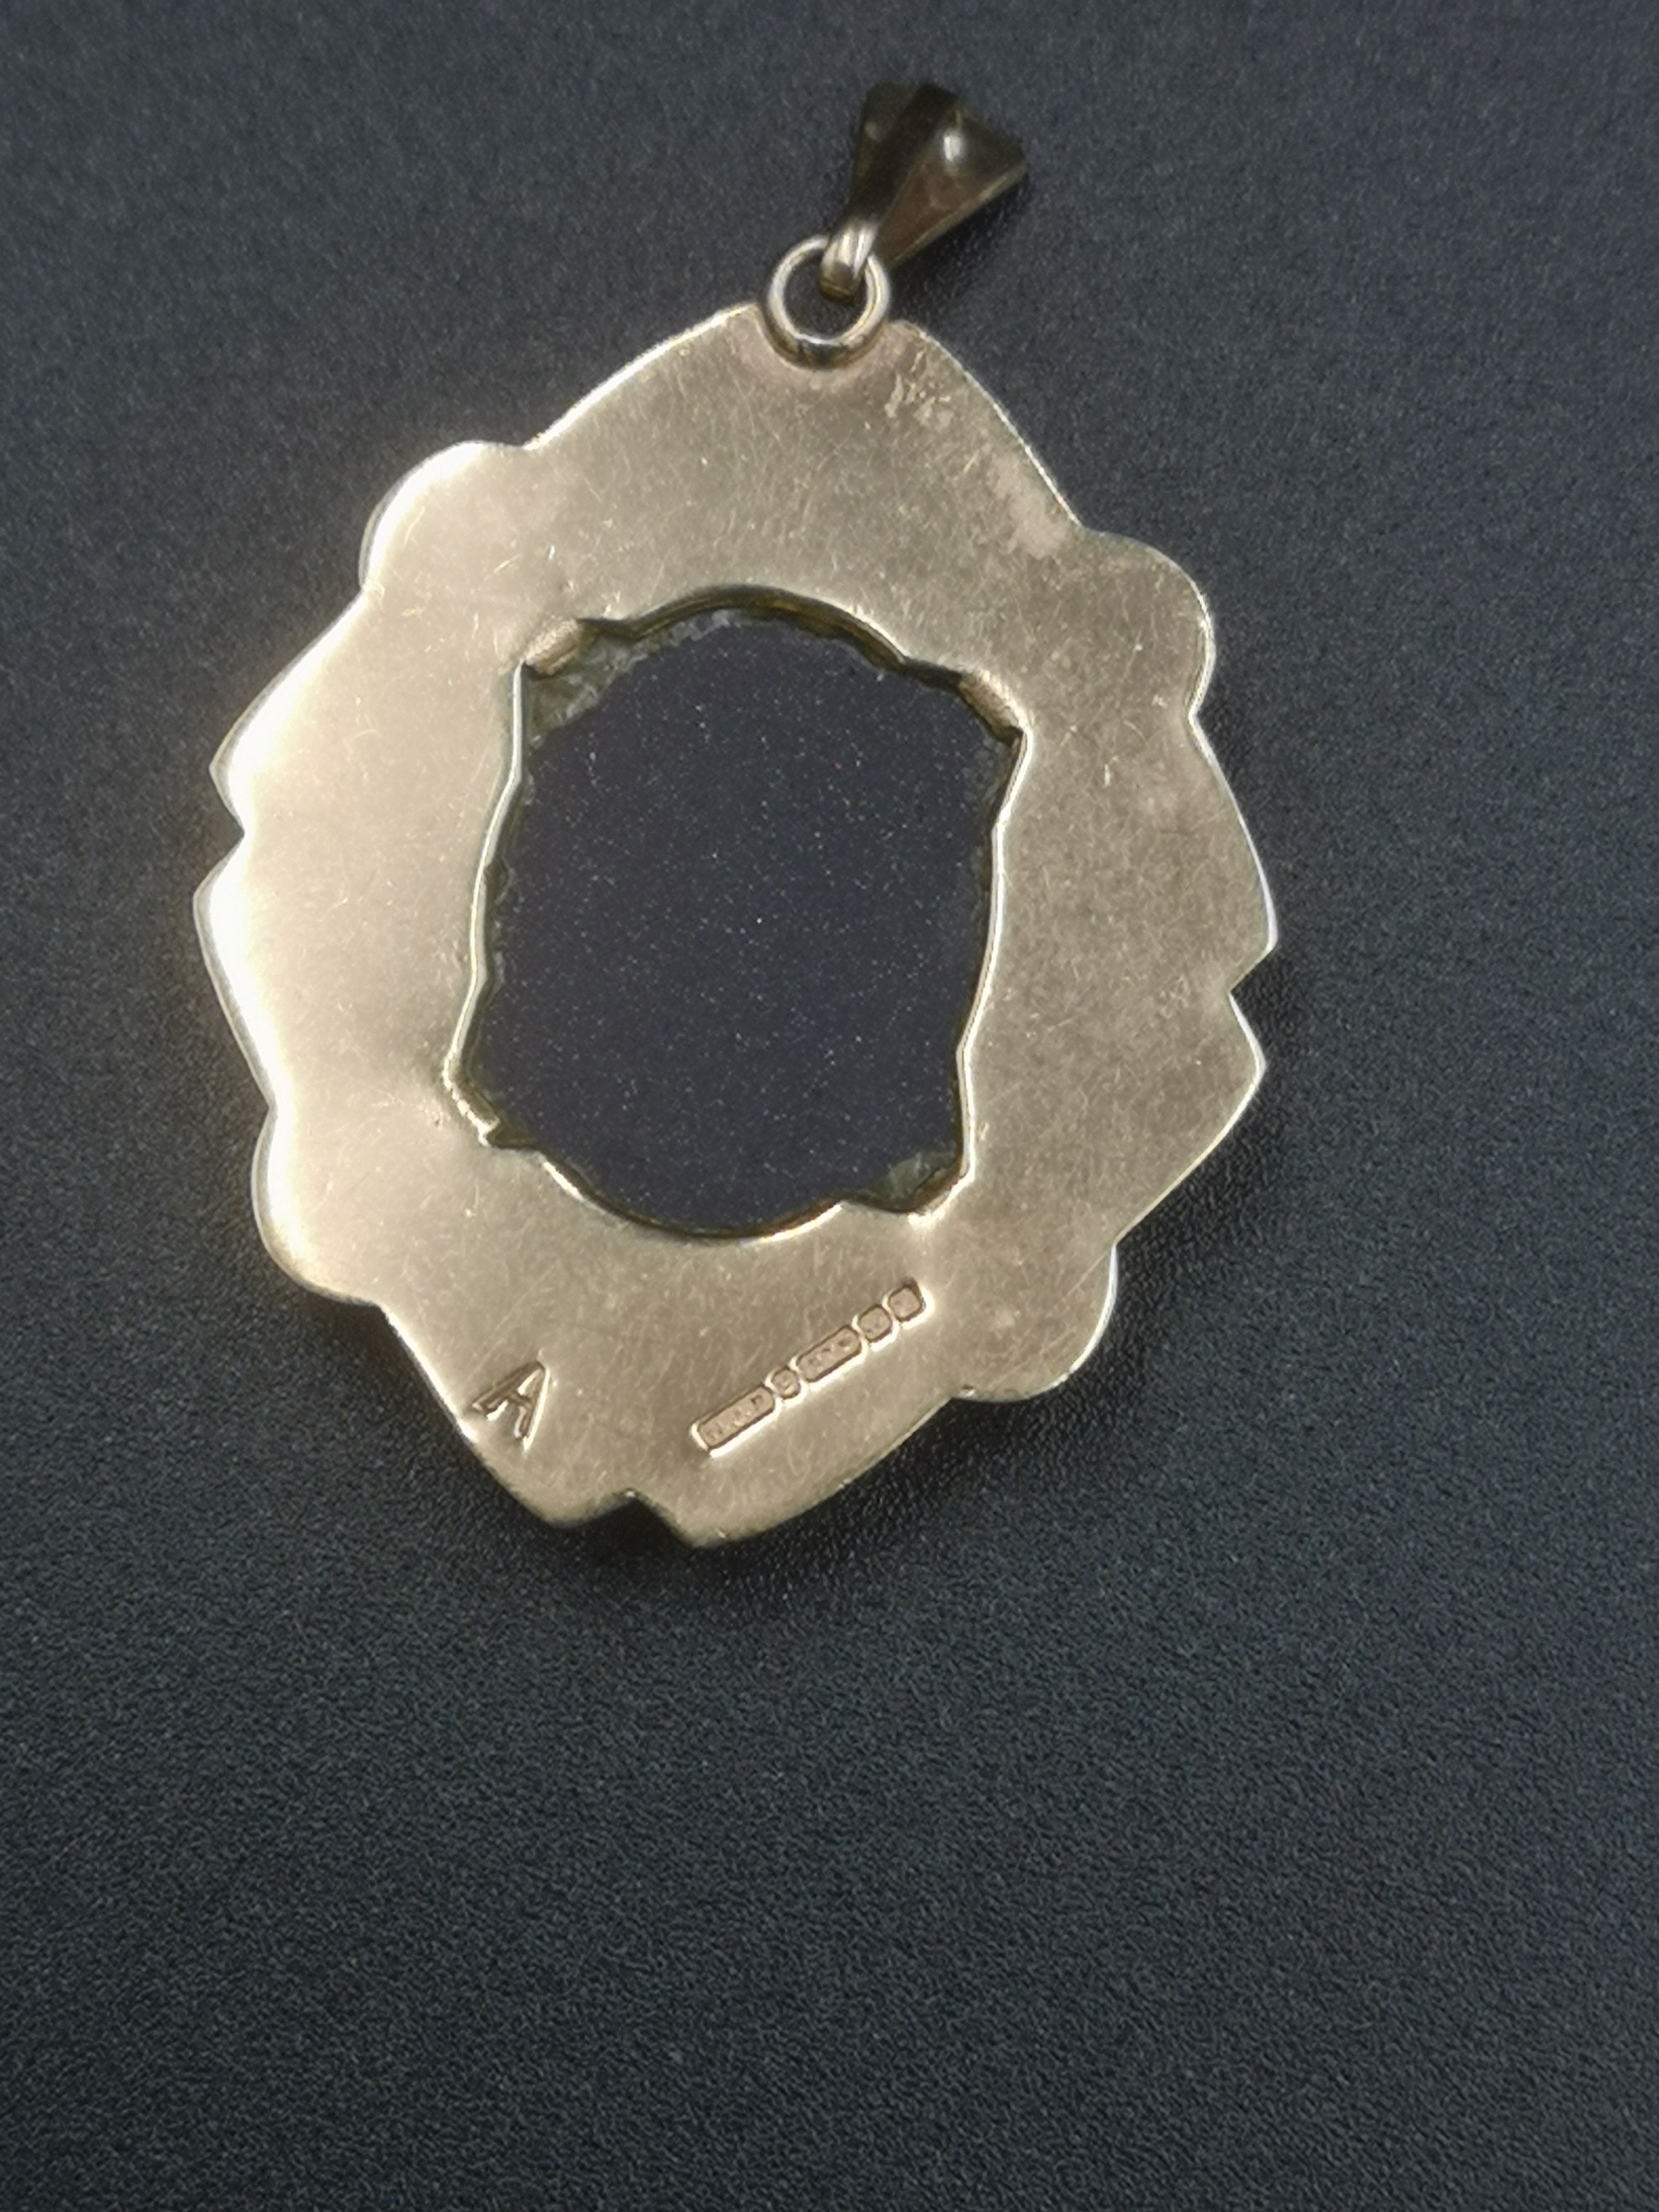 9ct gold pendant - Image 2 of 4